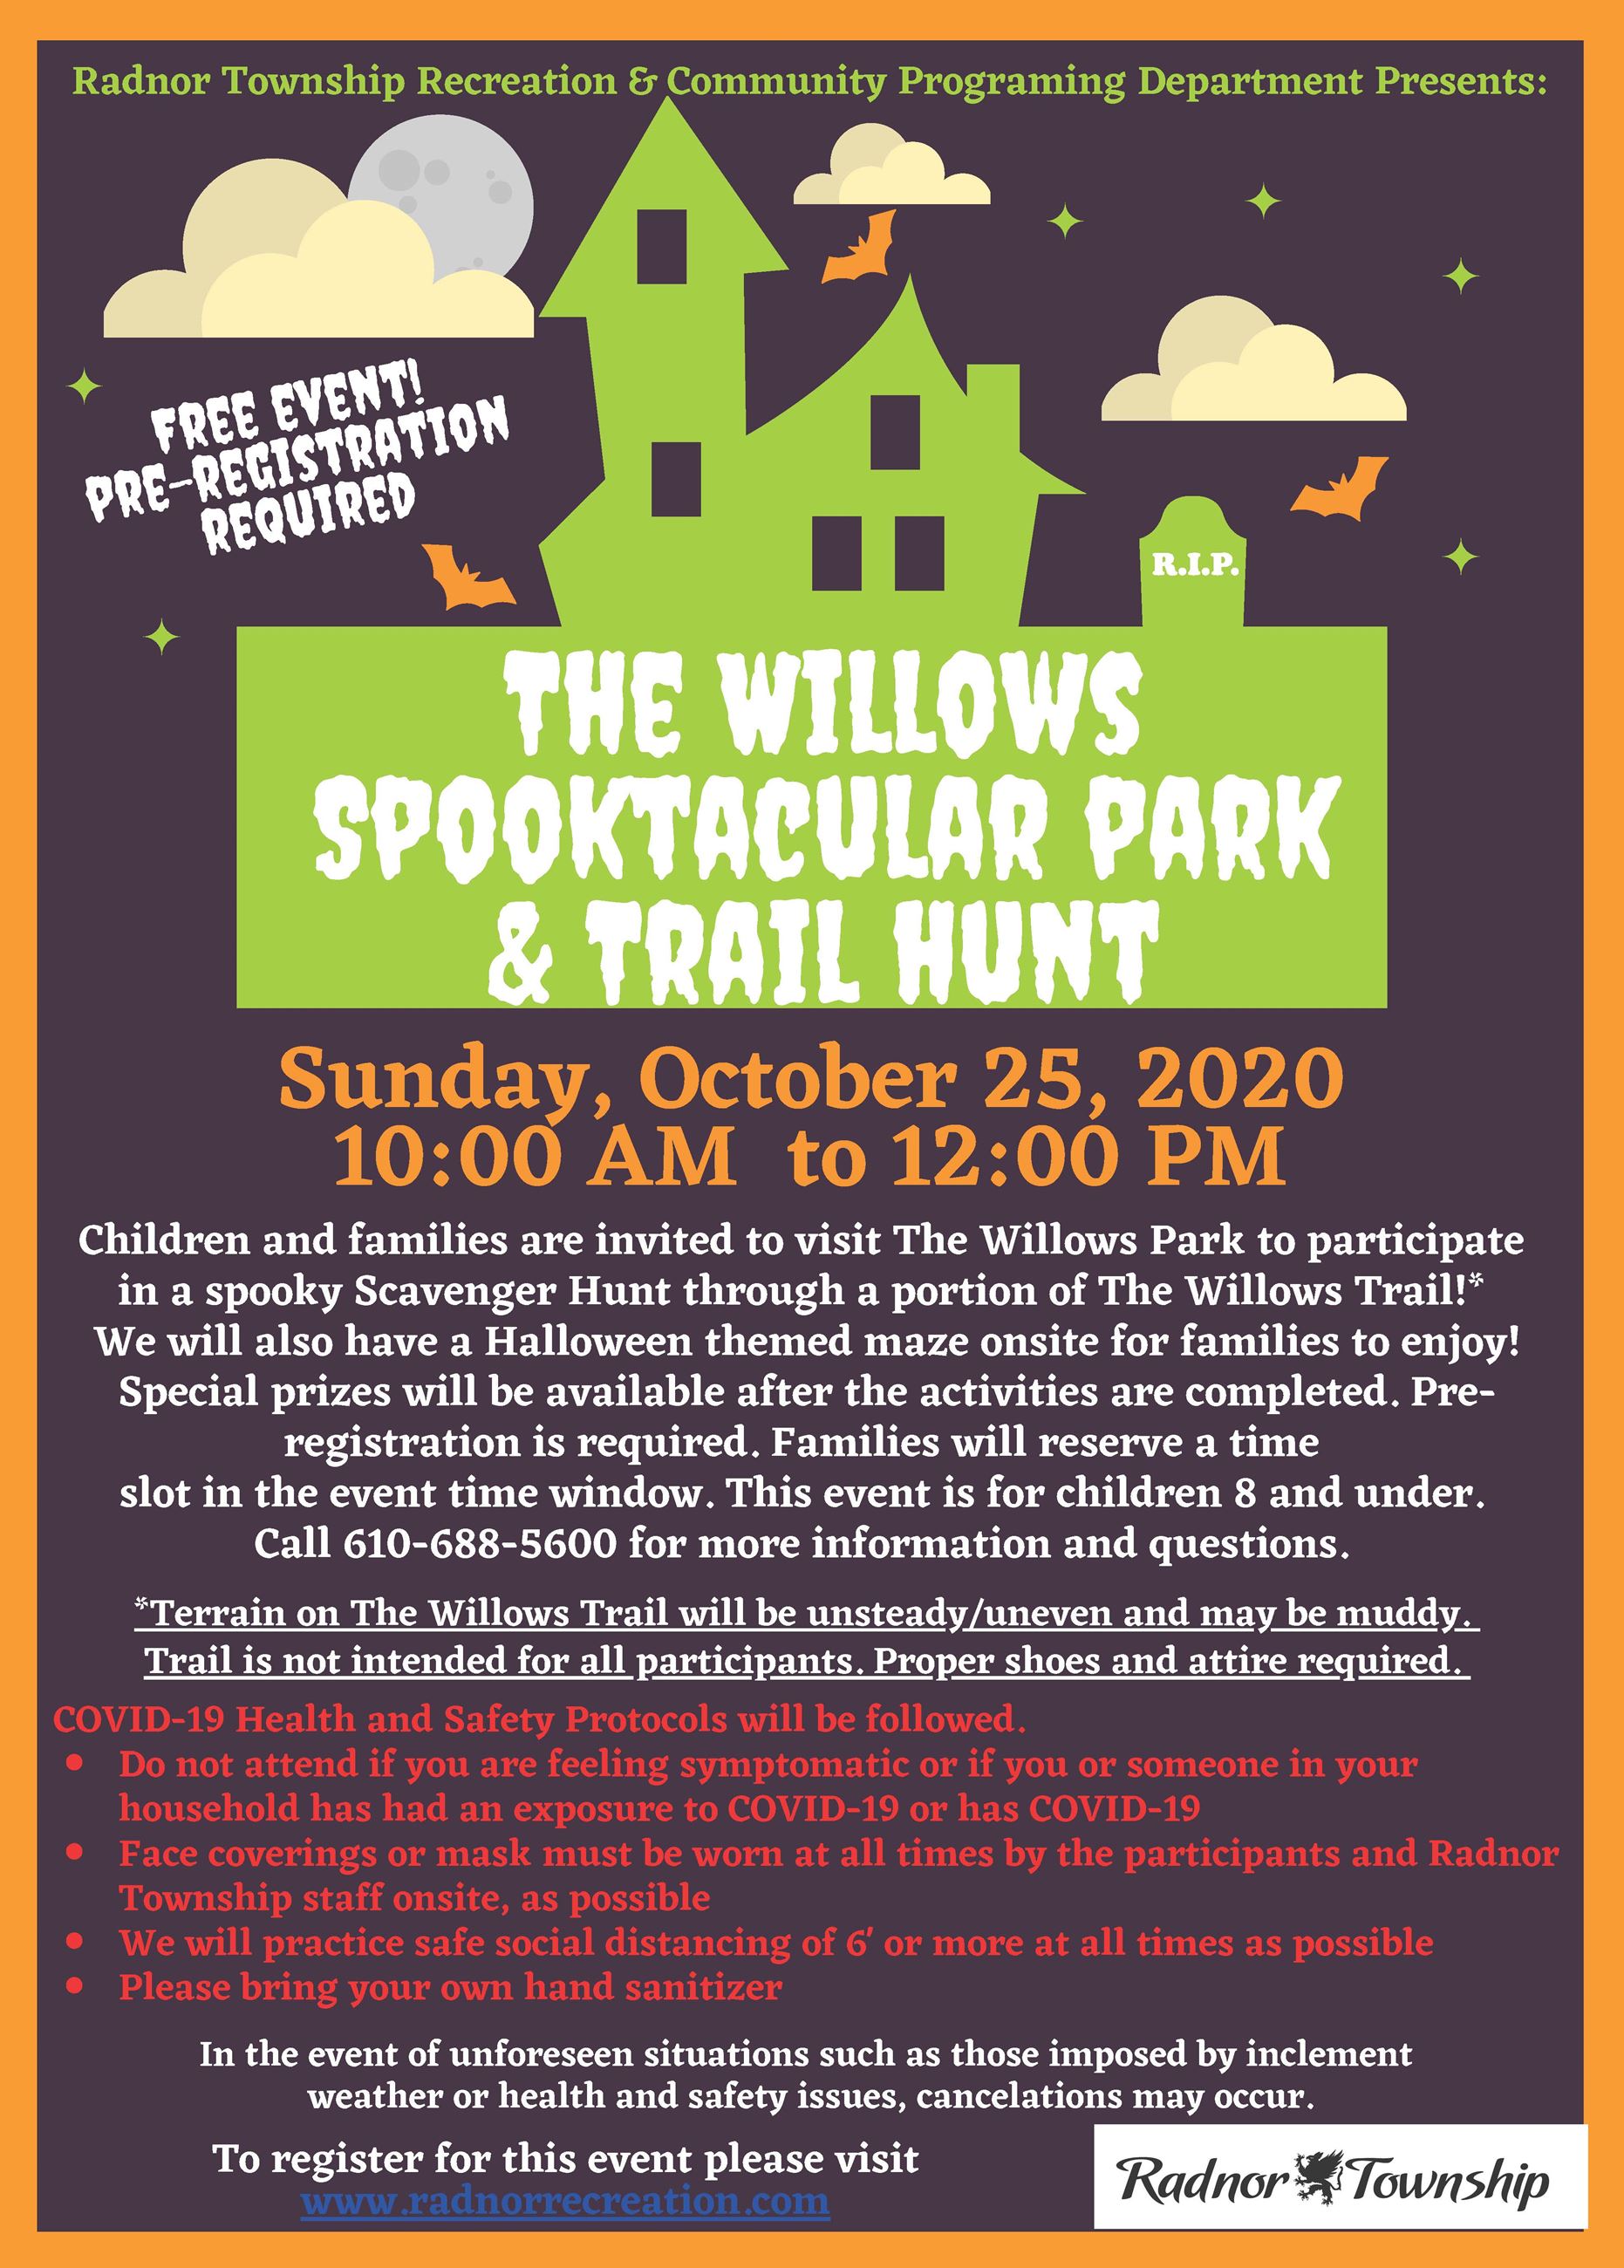 2020 The Willows Spooktacular Park & Trail Hunt Flyer